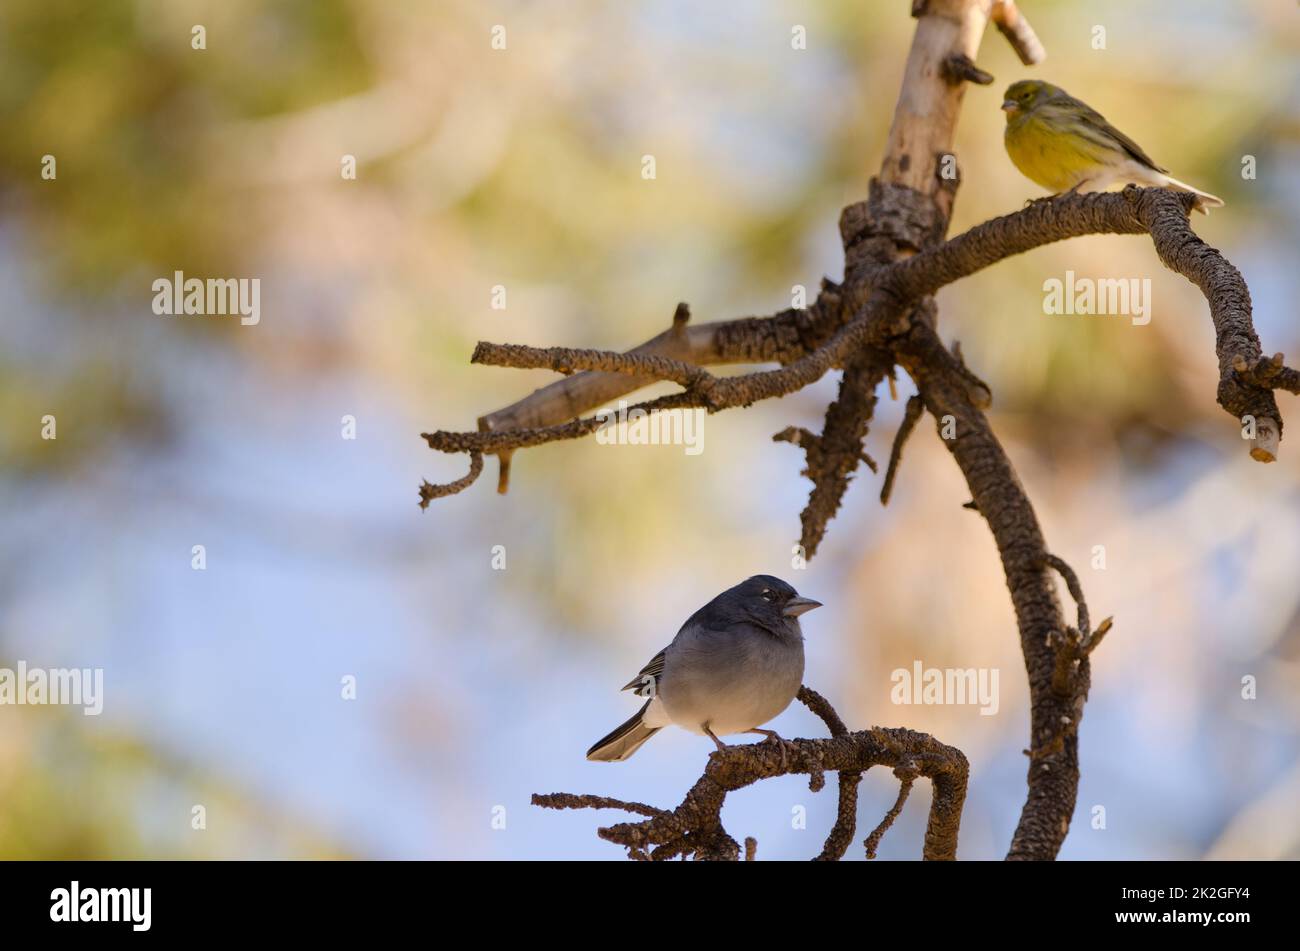 Tenerife blue chaffinch and Atlantic canary. Stock Photo